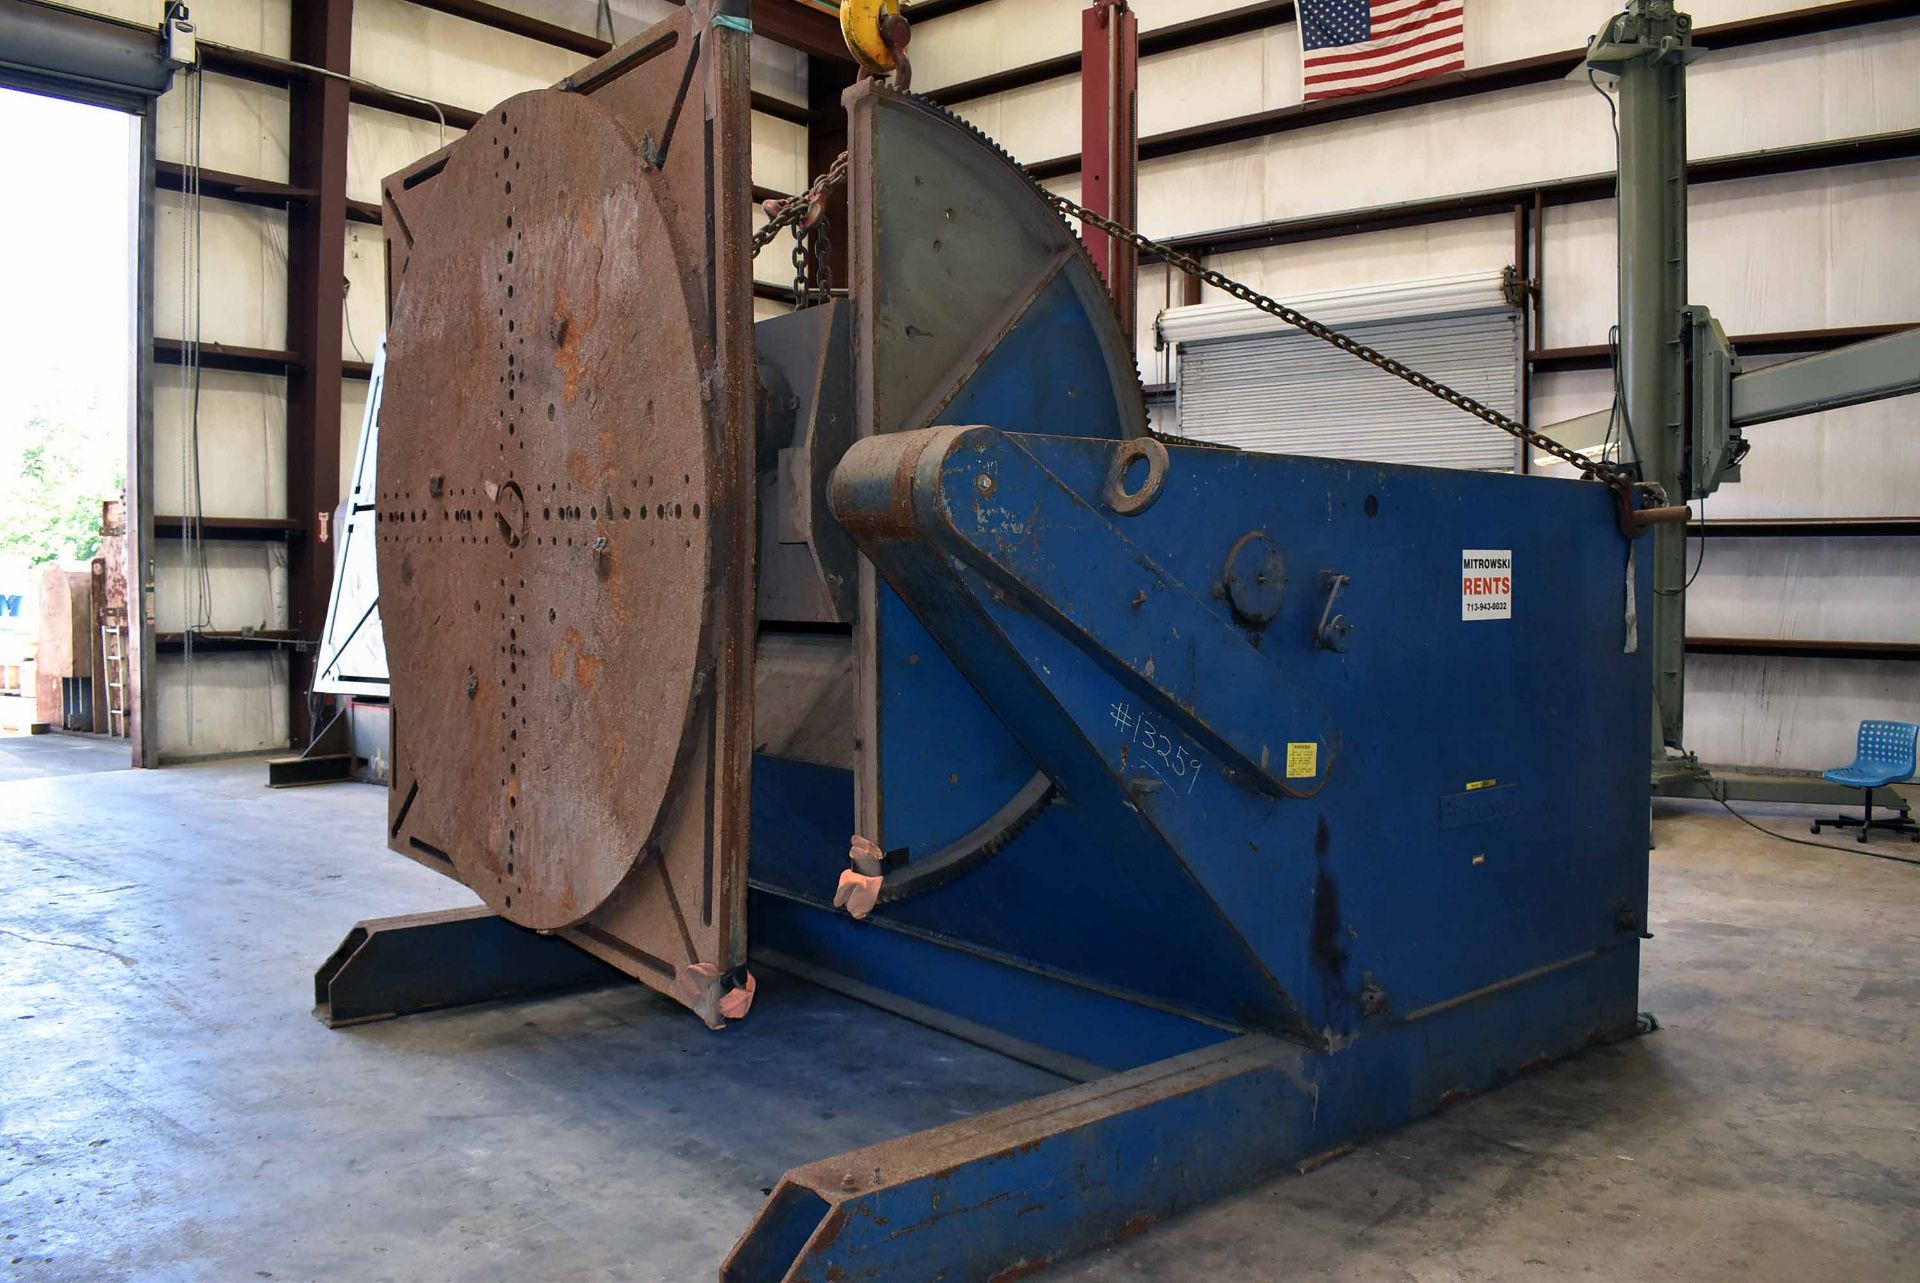 LARGE CAPACITY WELDING POSITIONER, KOIKE ARONSON 95,000 LB. CAP., Mdl. AB-950-96, 96" X 96" square - Image 4 of 11